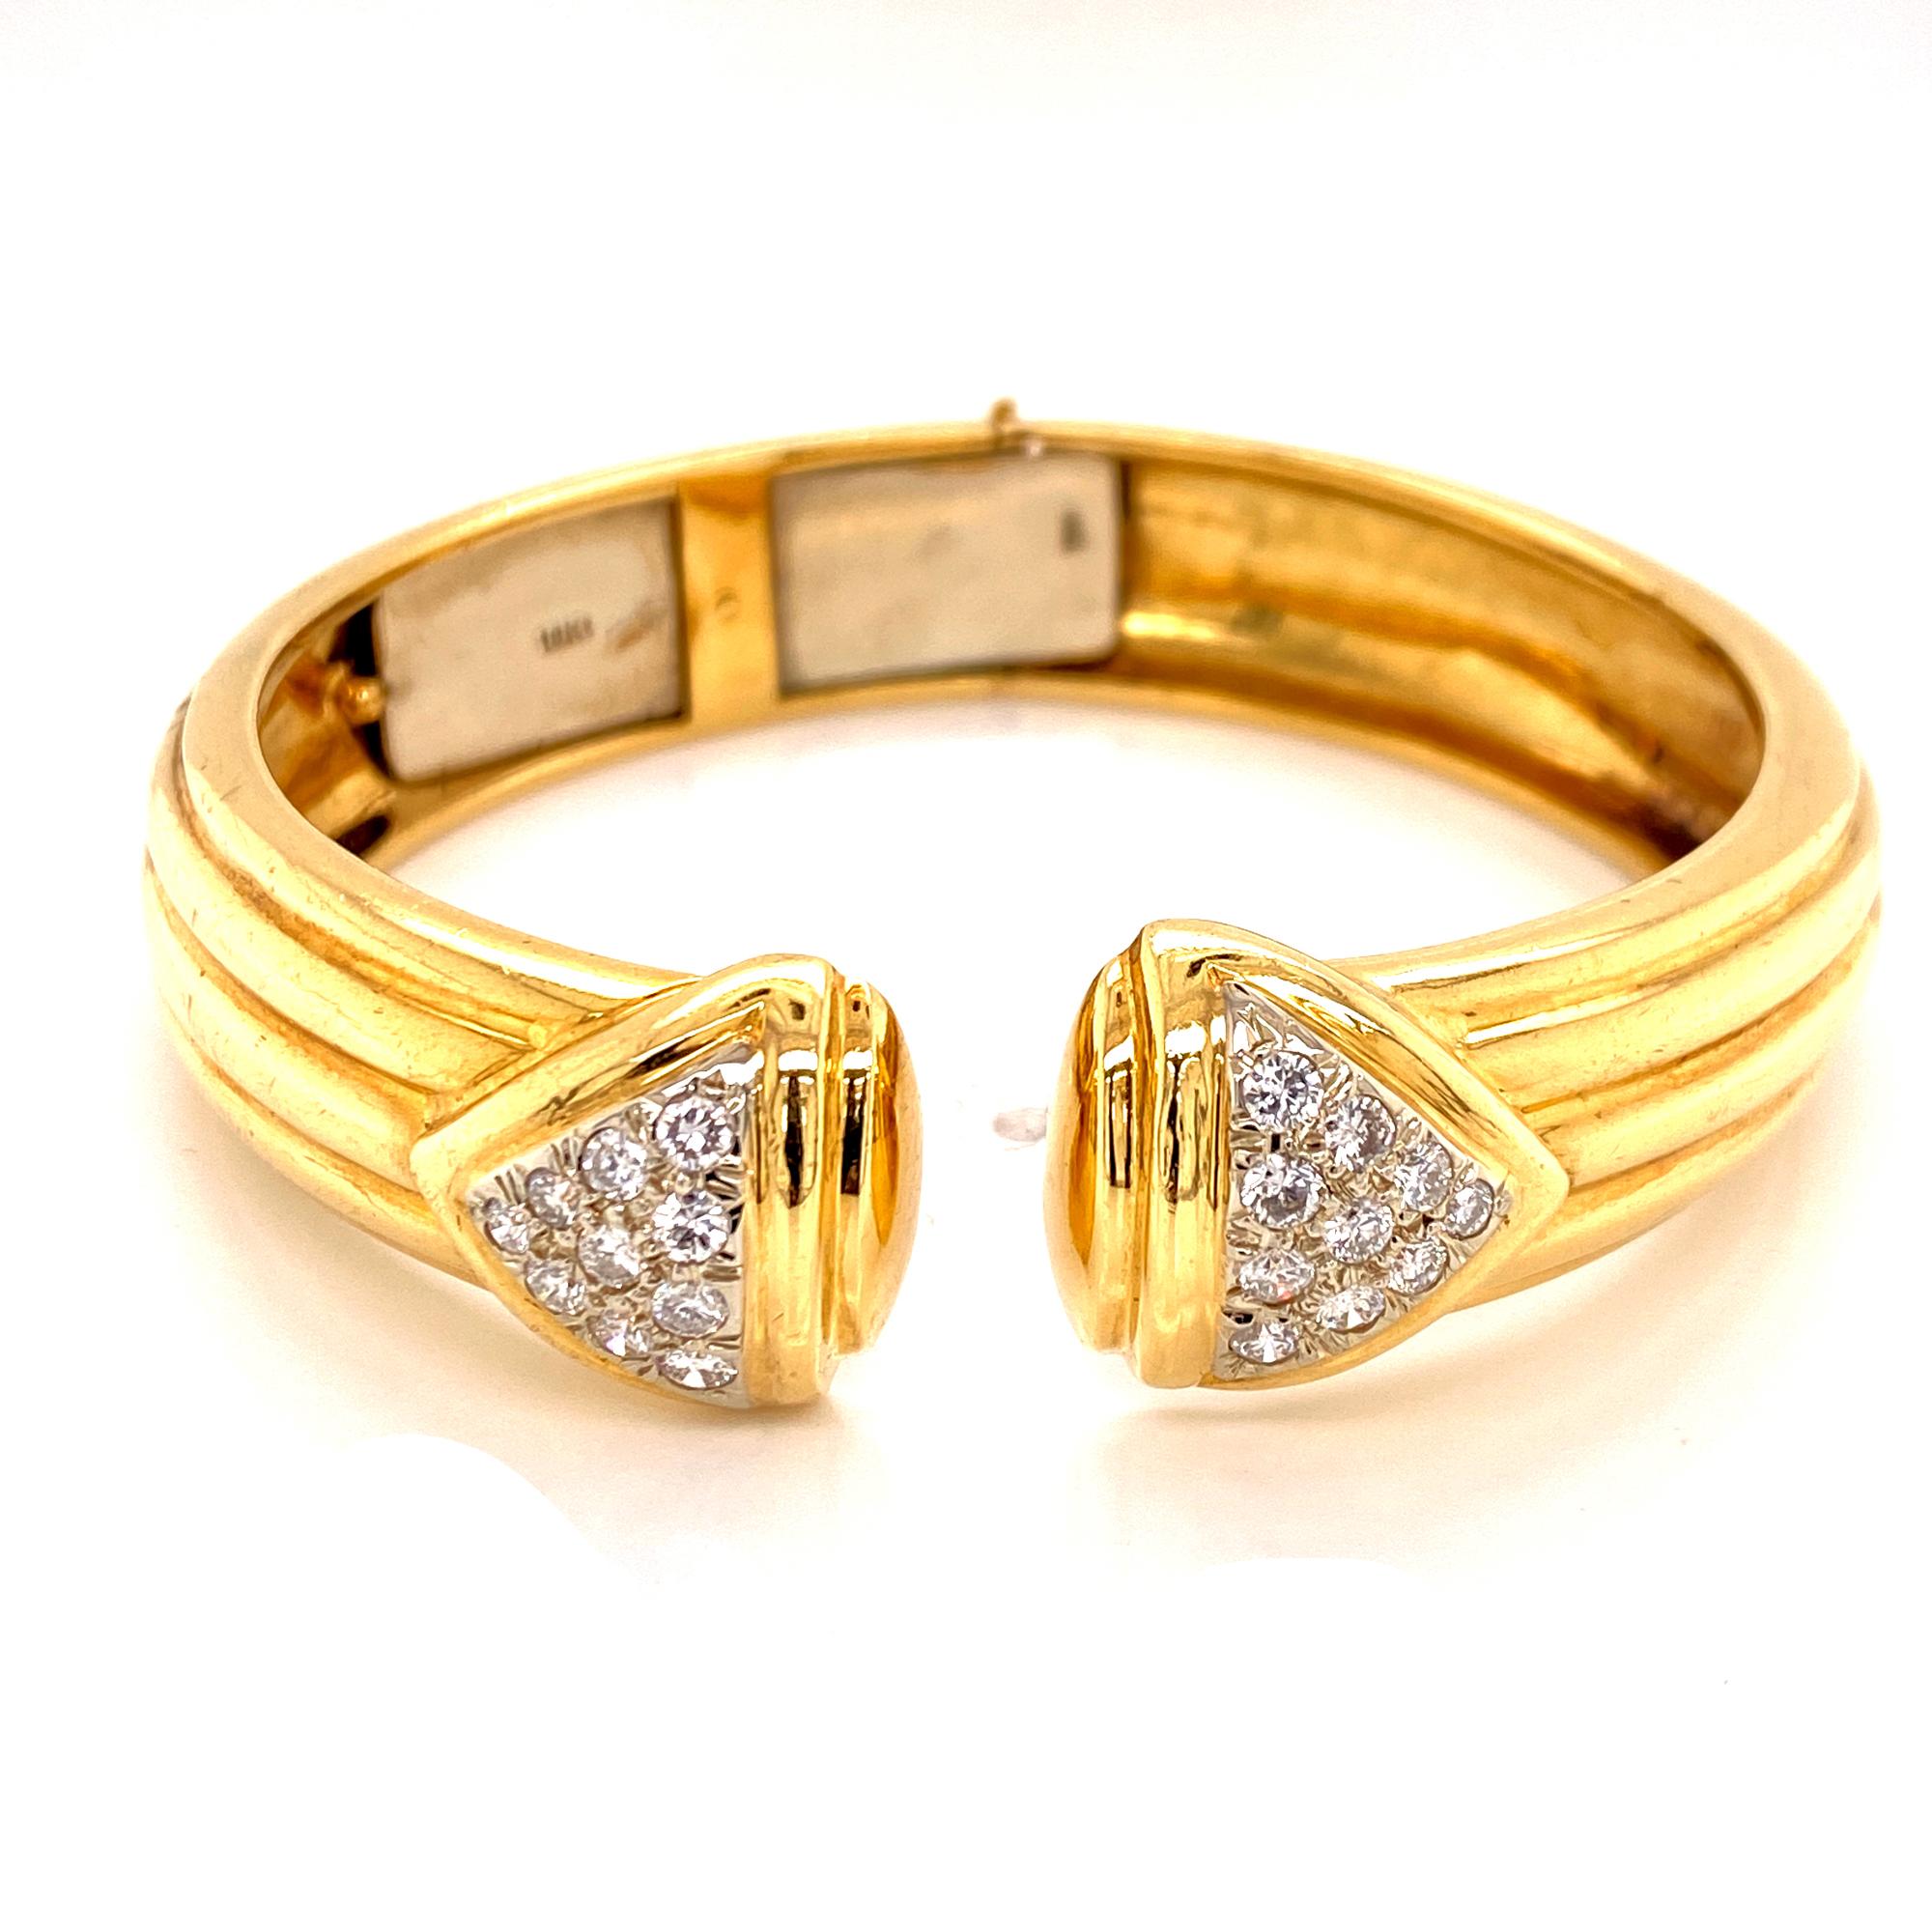 Beautiful diamond hinged cuff bracelet fashioned in 18 karat yellow gold. The ribbed cuff is circa 1970's, and features 20 round brilliant cut diamonds weighing 1.00 carat total weight. The diamonds are graded G-H color and VS clarity. 

The cuff